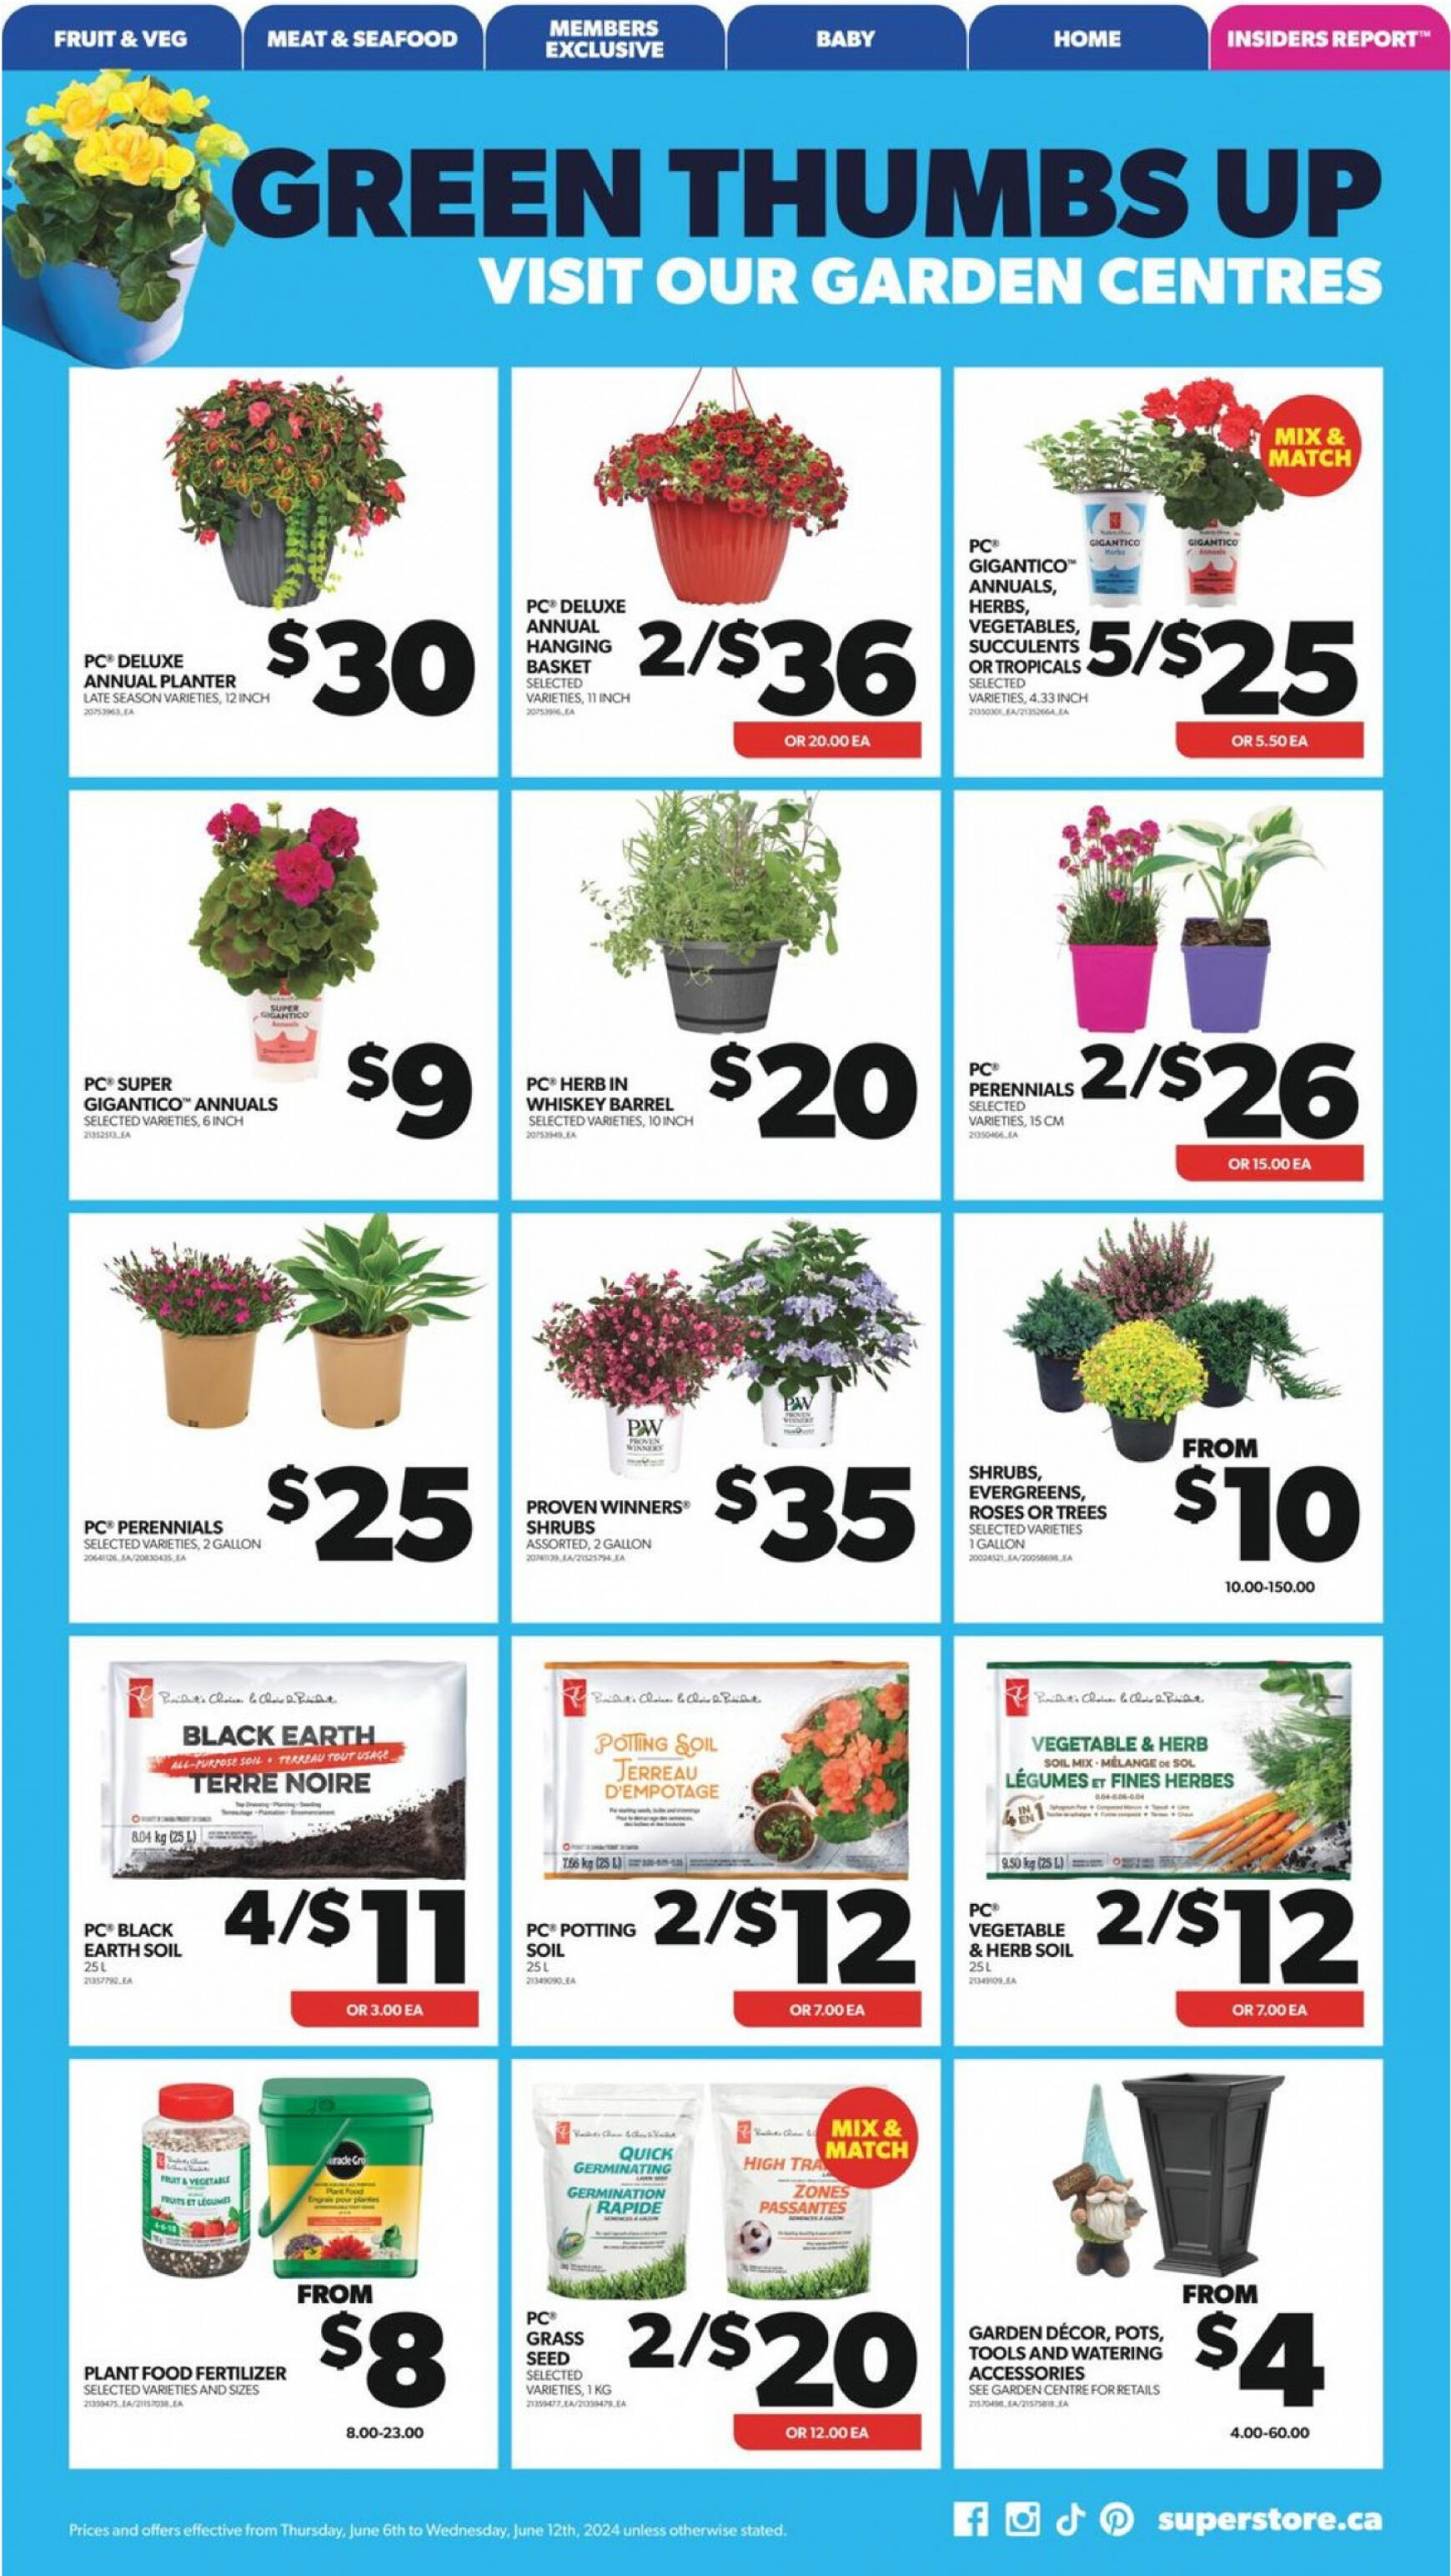 real-canadian-superstore - Real Canadian Superstore flyer current 06.06. - 12.06. - page: 12